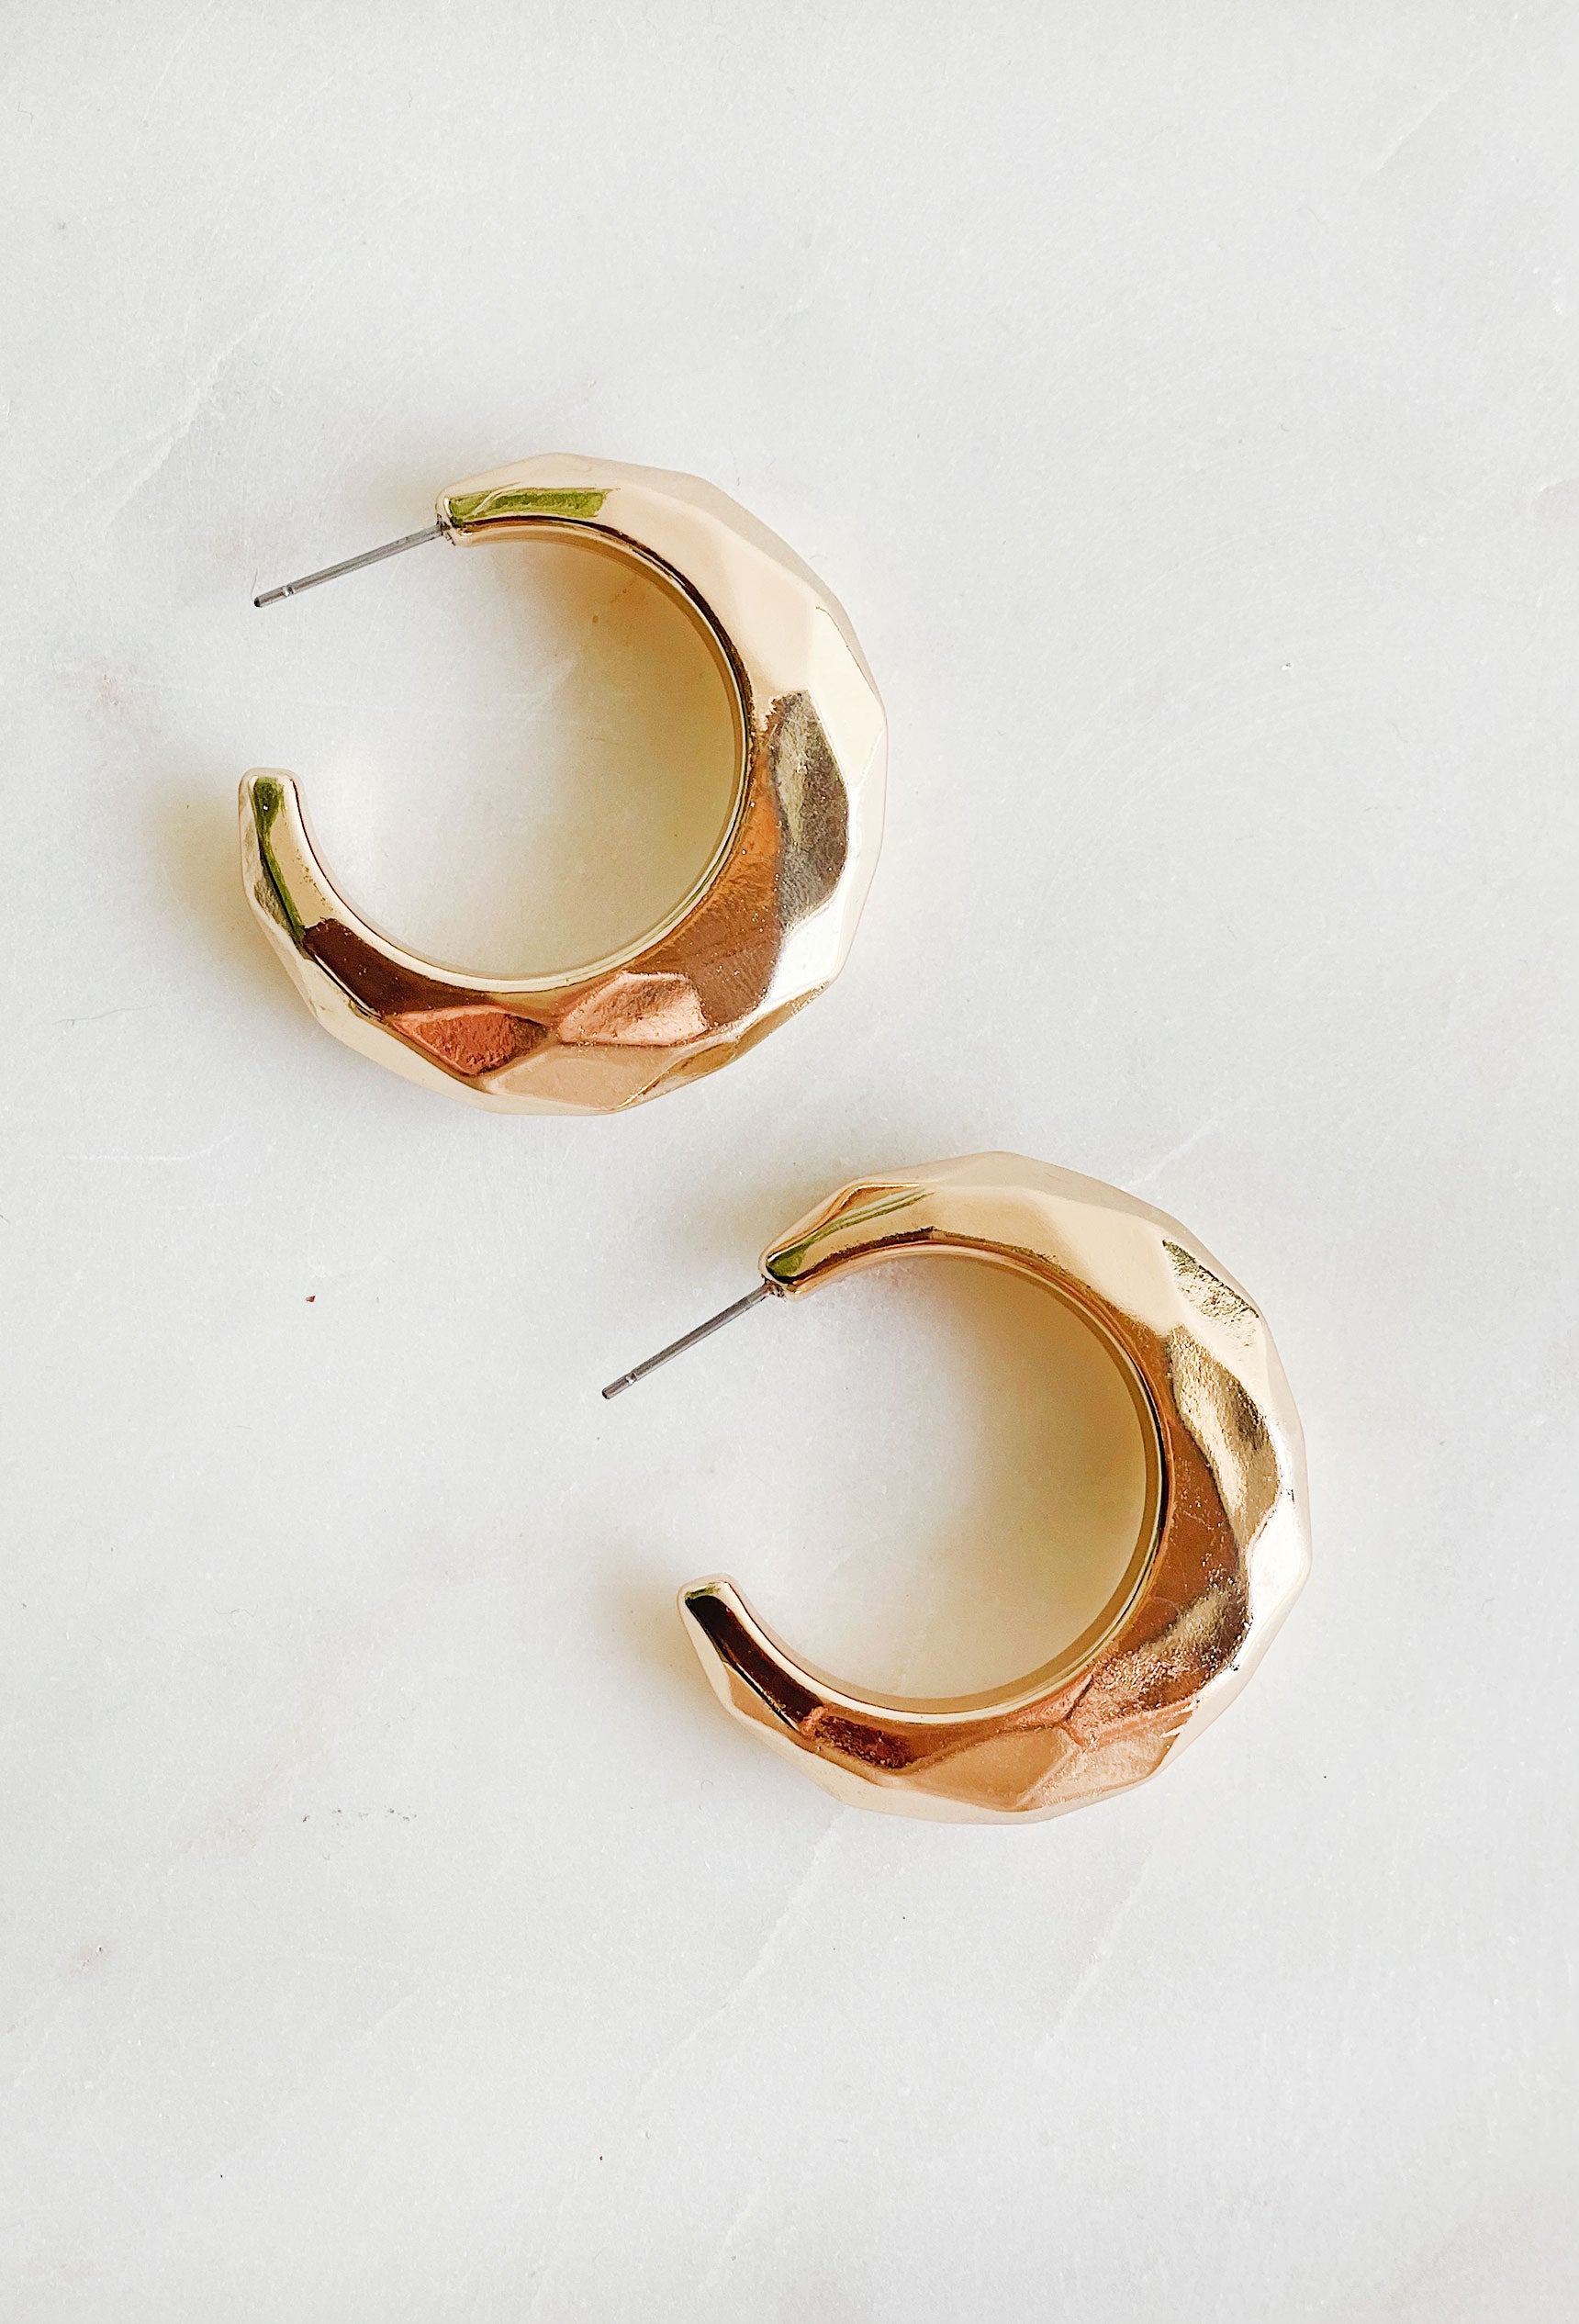 NYC Dreams Hoop Earrings, Textured gold hoop with a post backing